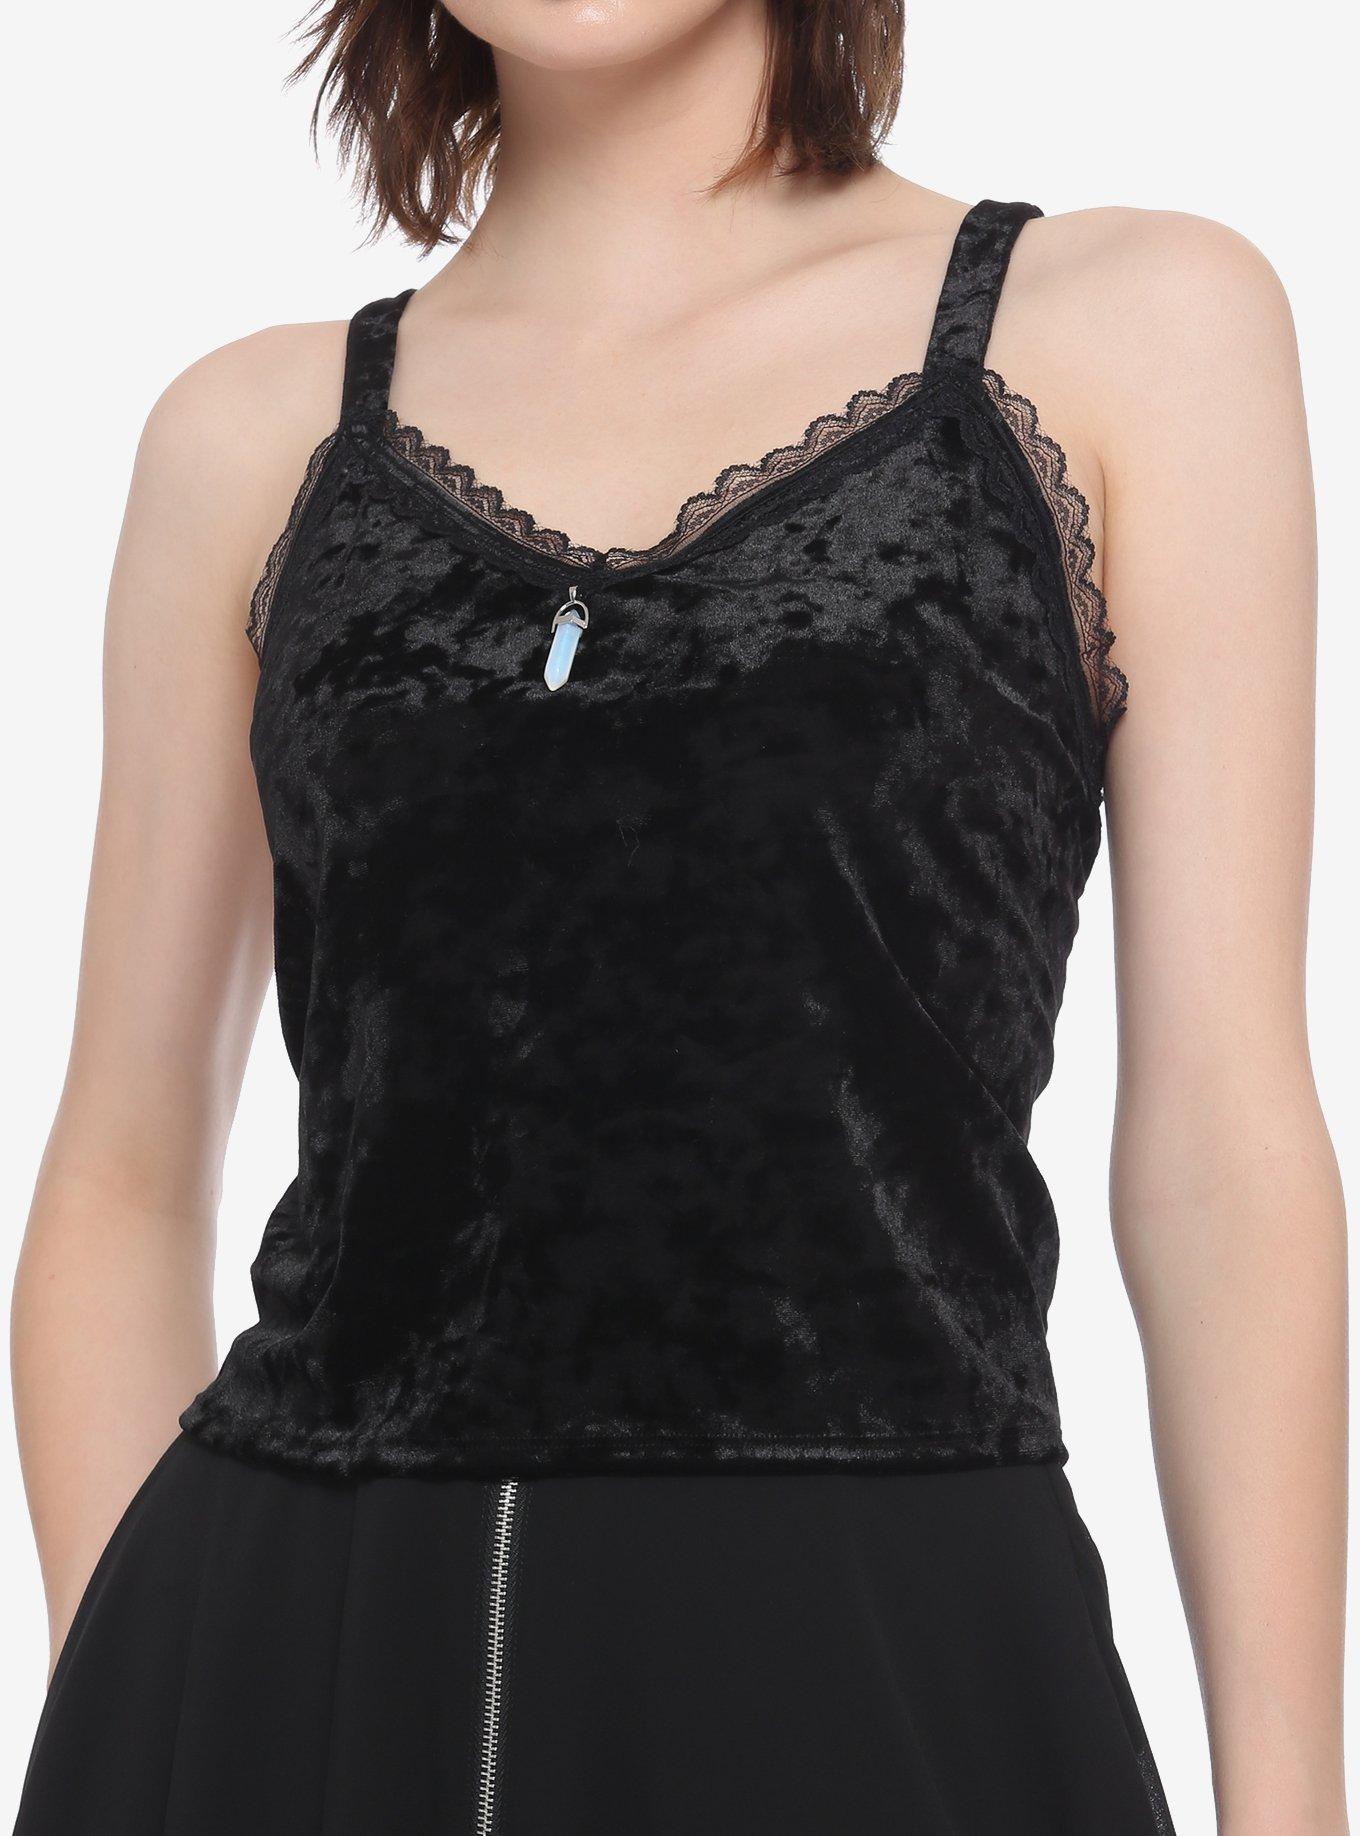 Crushed Velvet & Crystal Charm Girls Strappy Crop Tank Top